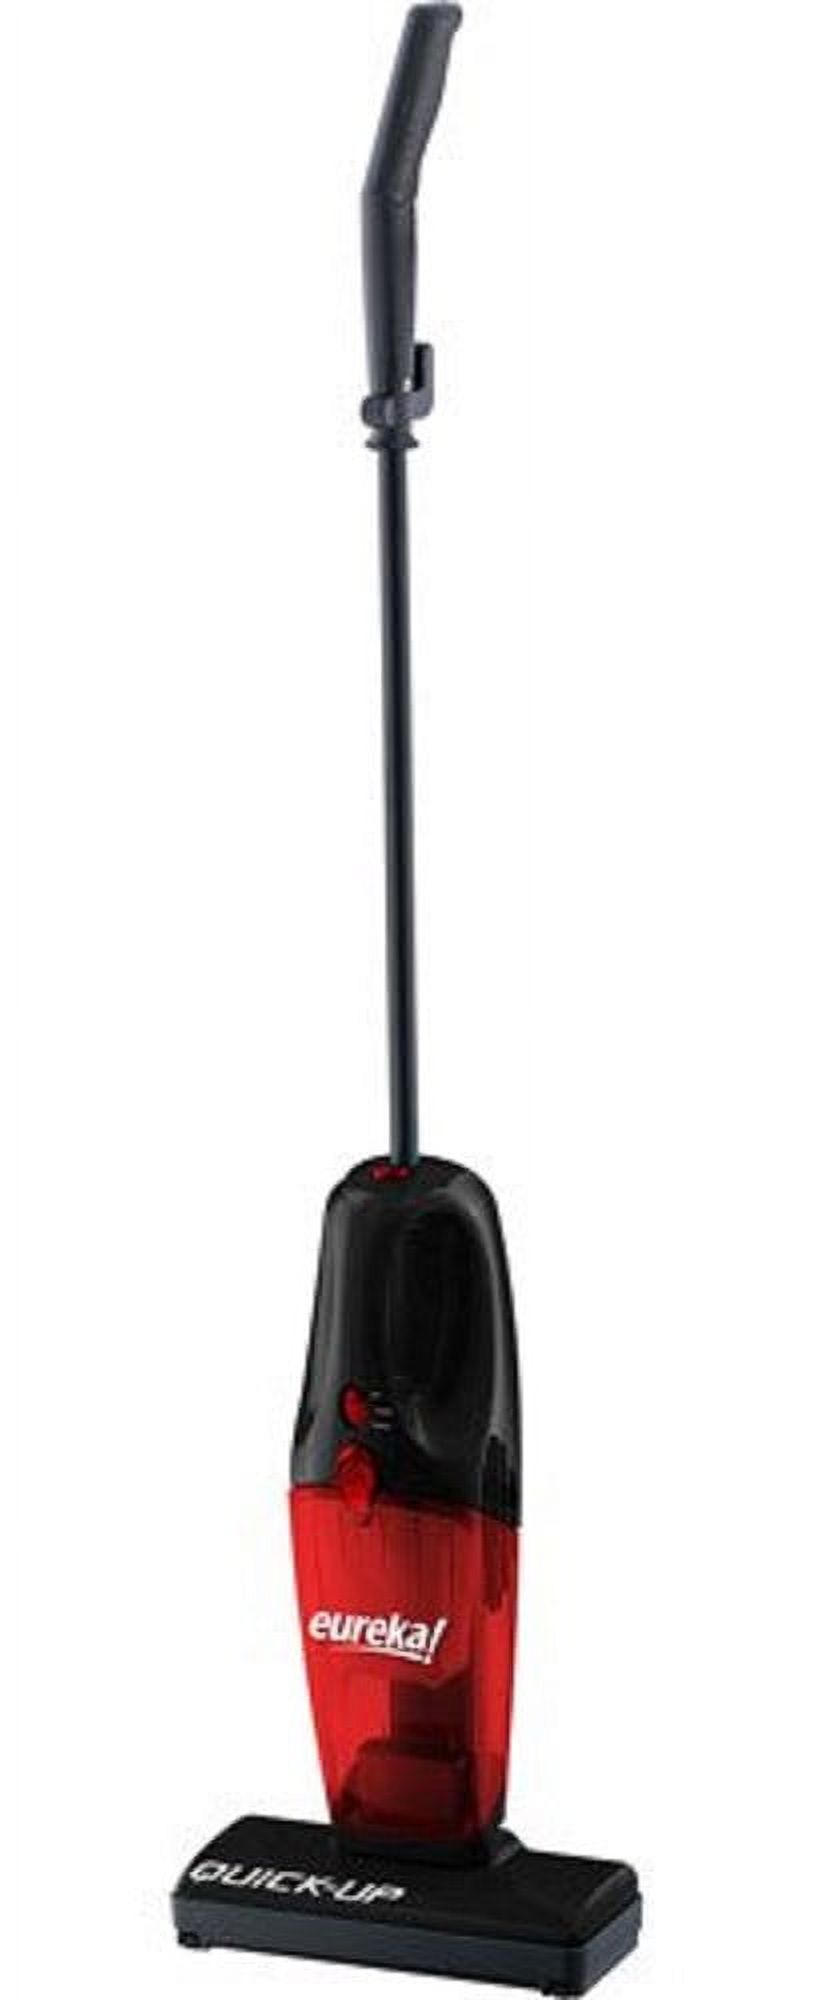 Eureka Multi-surface Bagless Stick Vacuum Cleaner with Motorized Brush Roll Quick-Up, 169J, Red - image 1 of 6